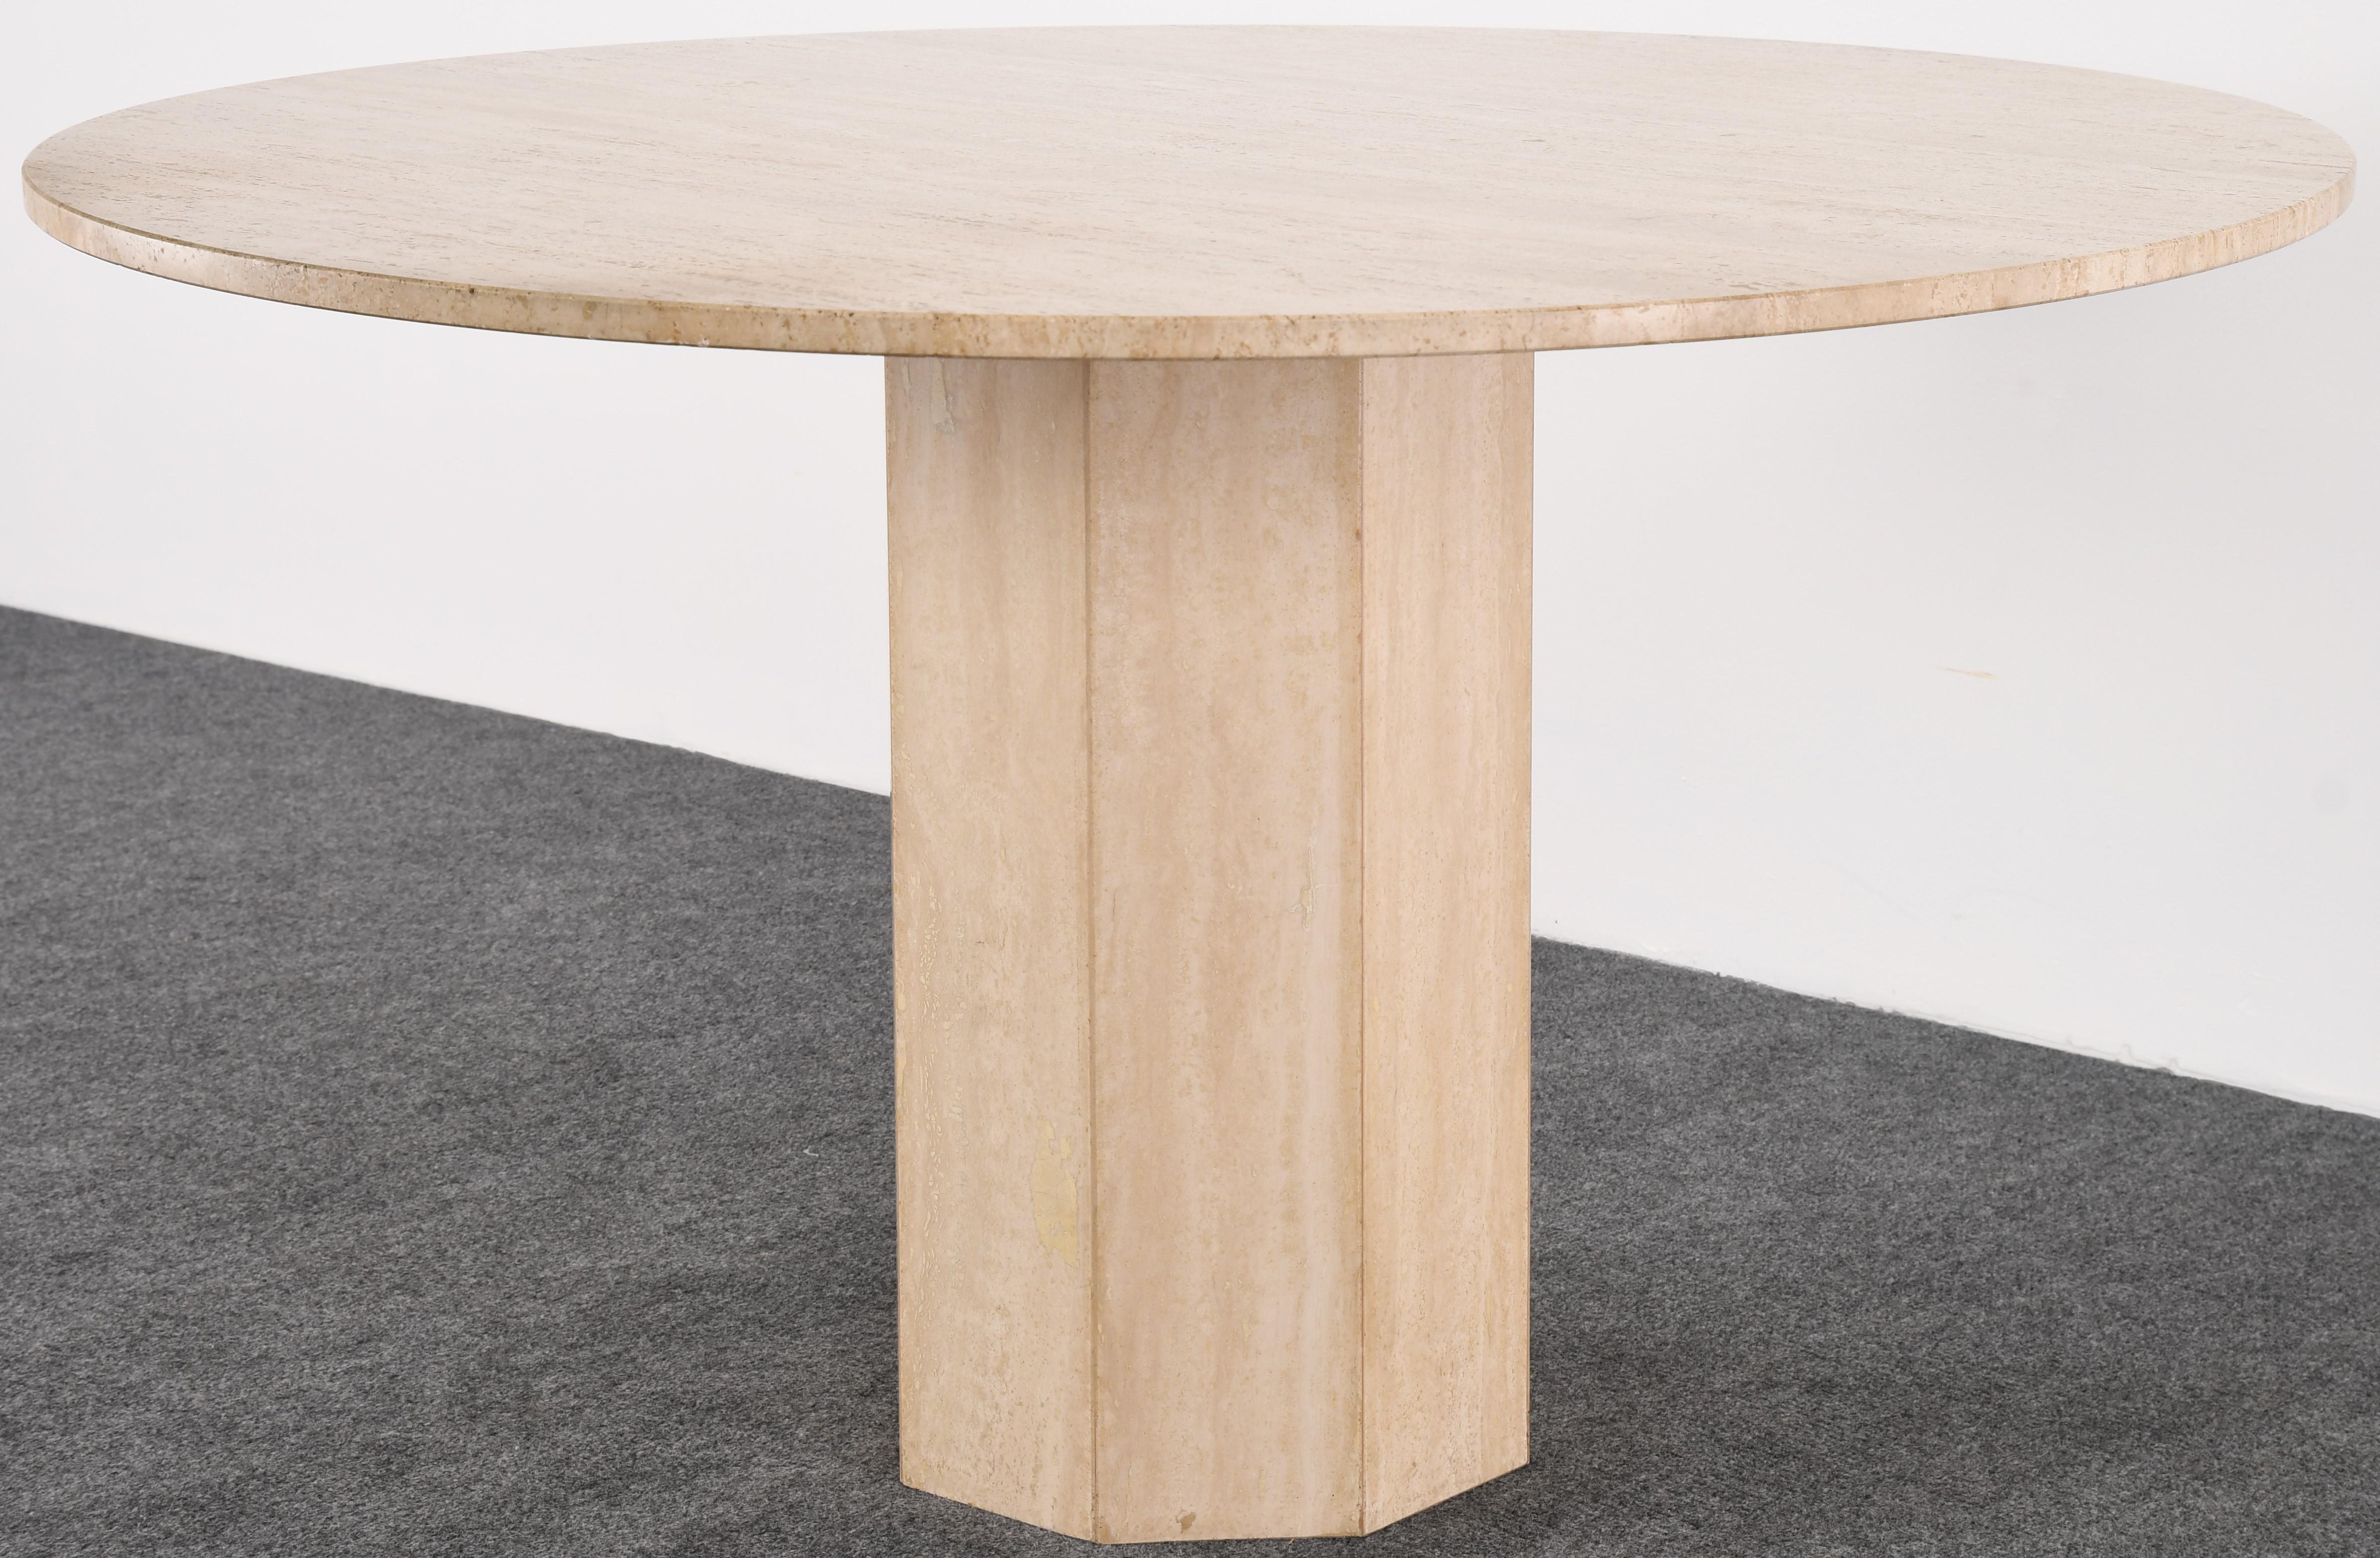 A beautiful, natural Italian travertine round dining table. This Roche Bobois style table has an octagonal pedestal base. Comes in two sections for easy assembly. 

Dimensions: 28.5